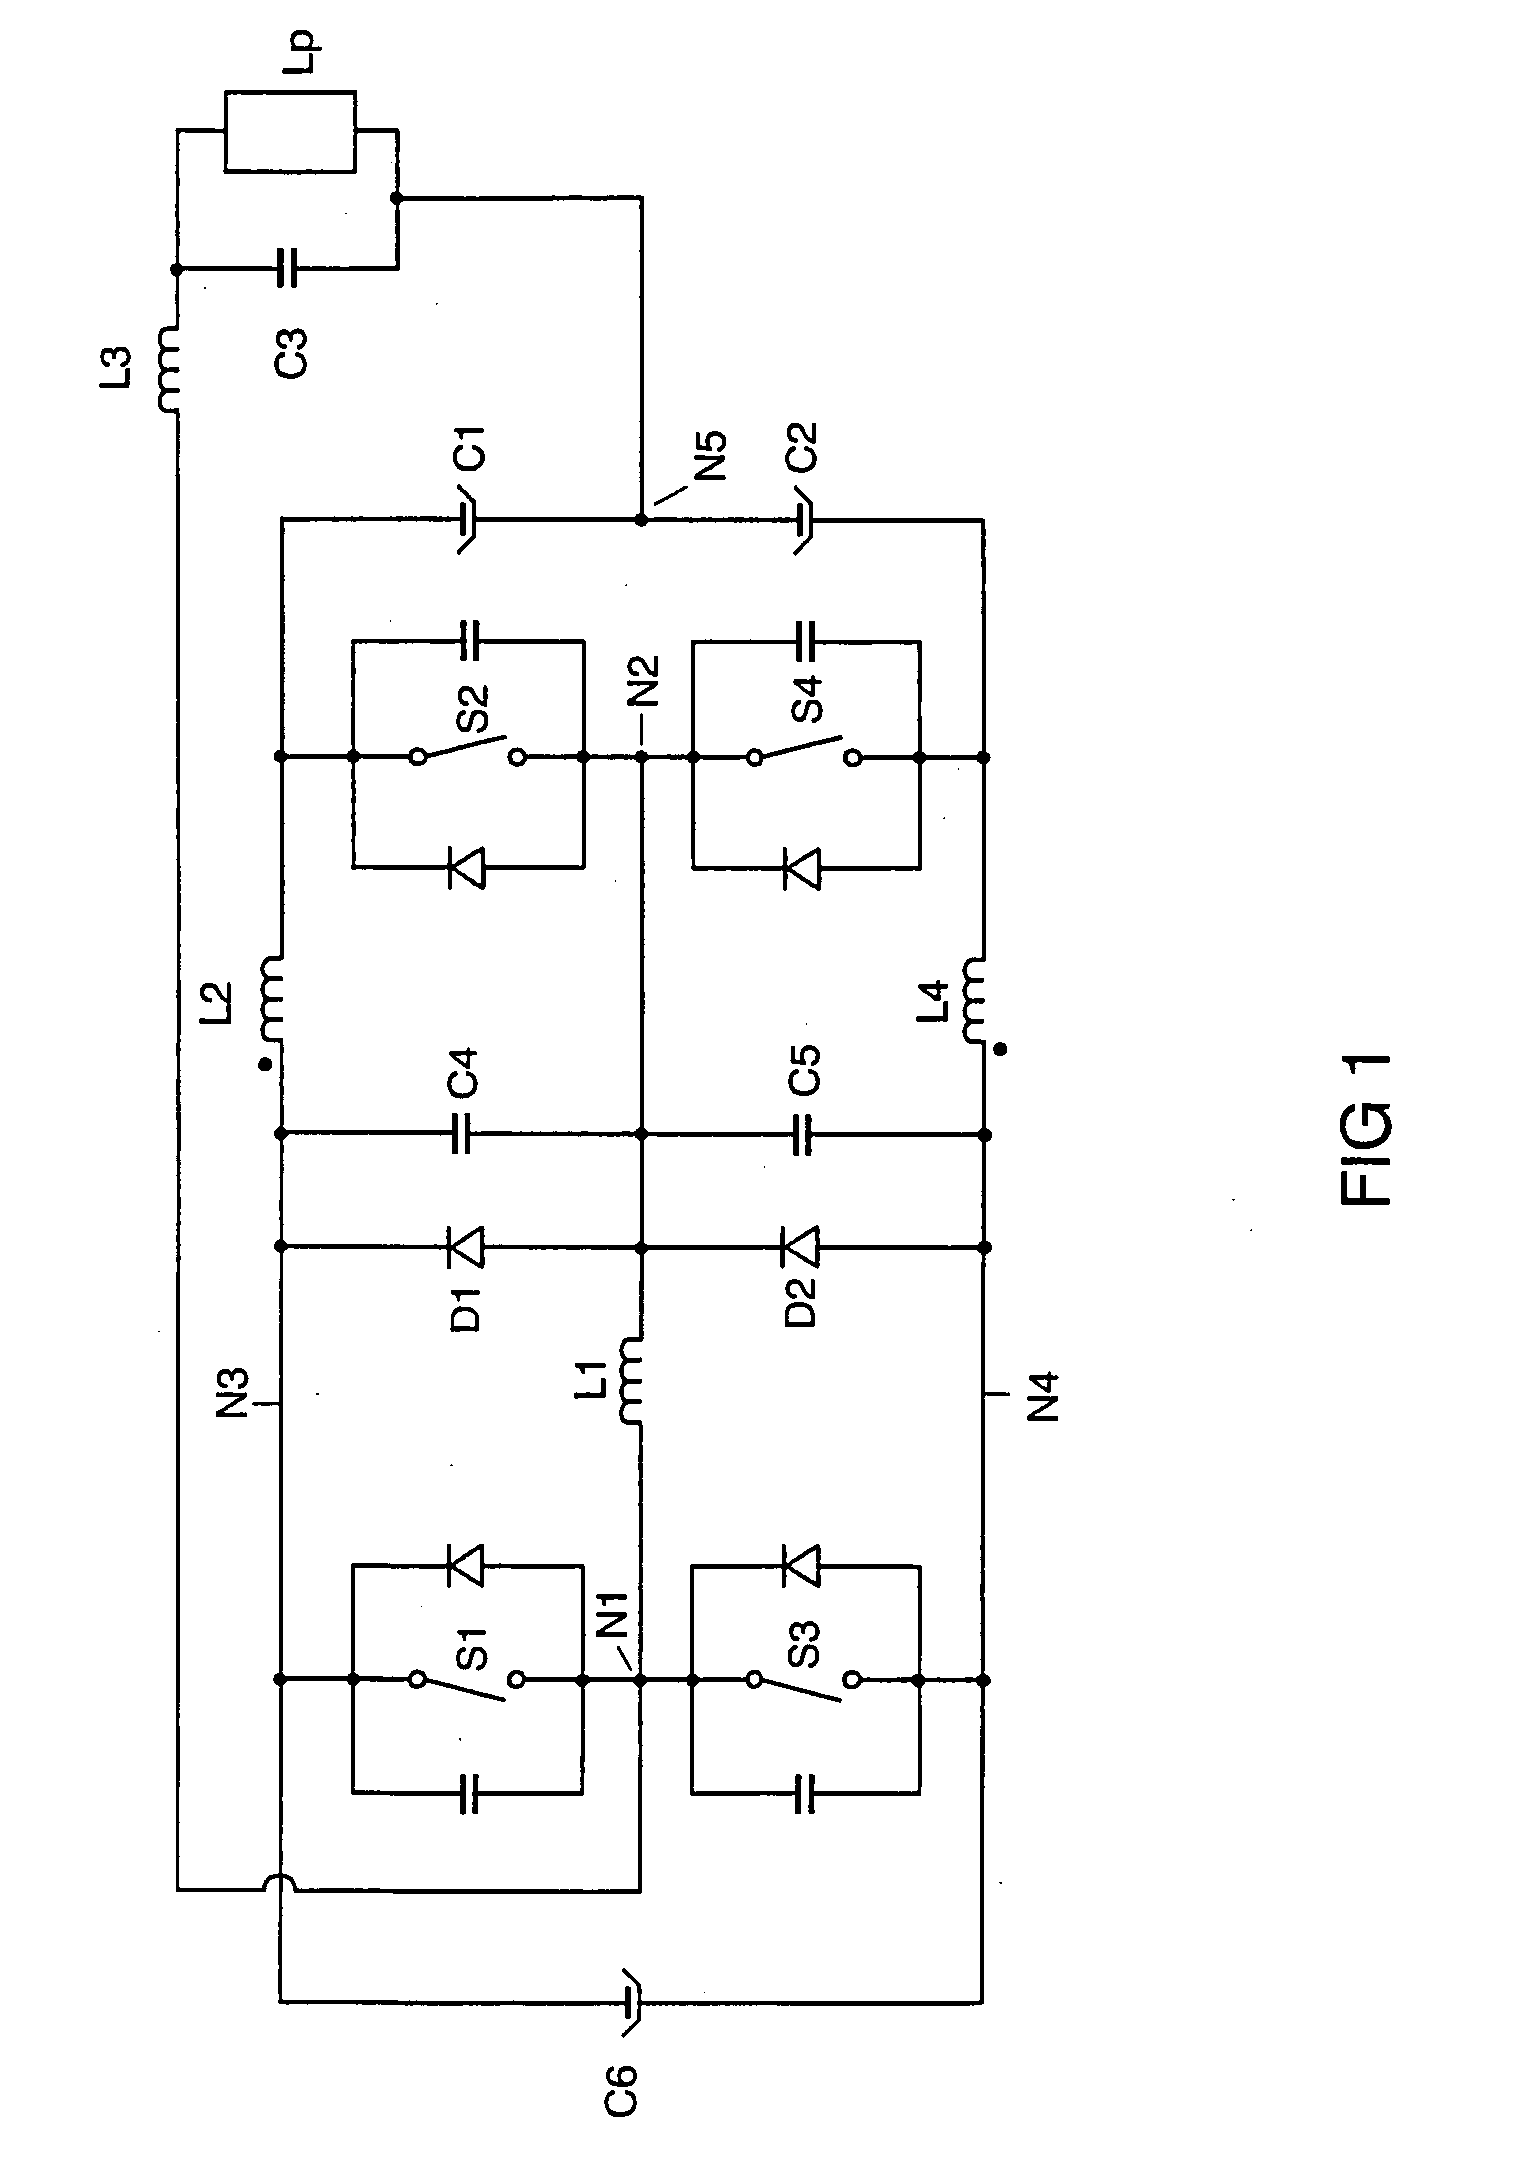 Circuit arrangement having a full bridge with switching load relief for operating lamps